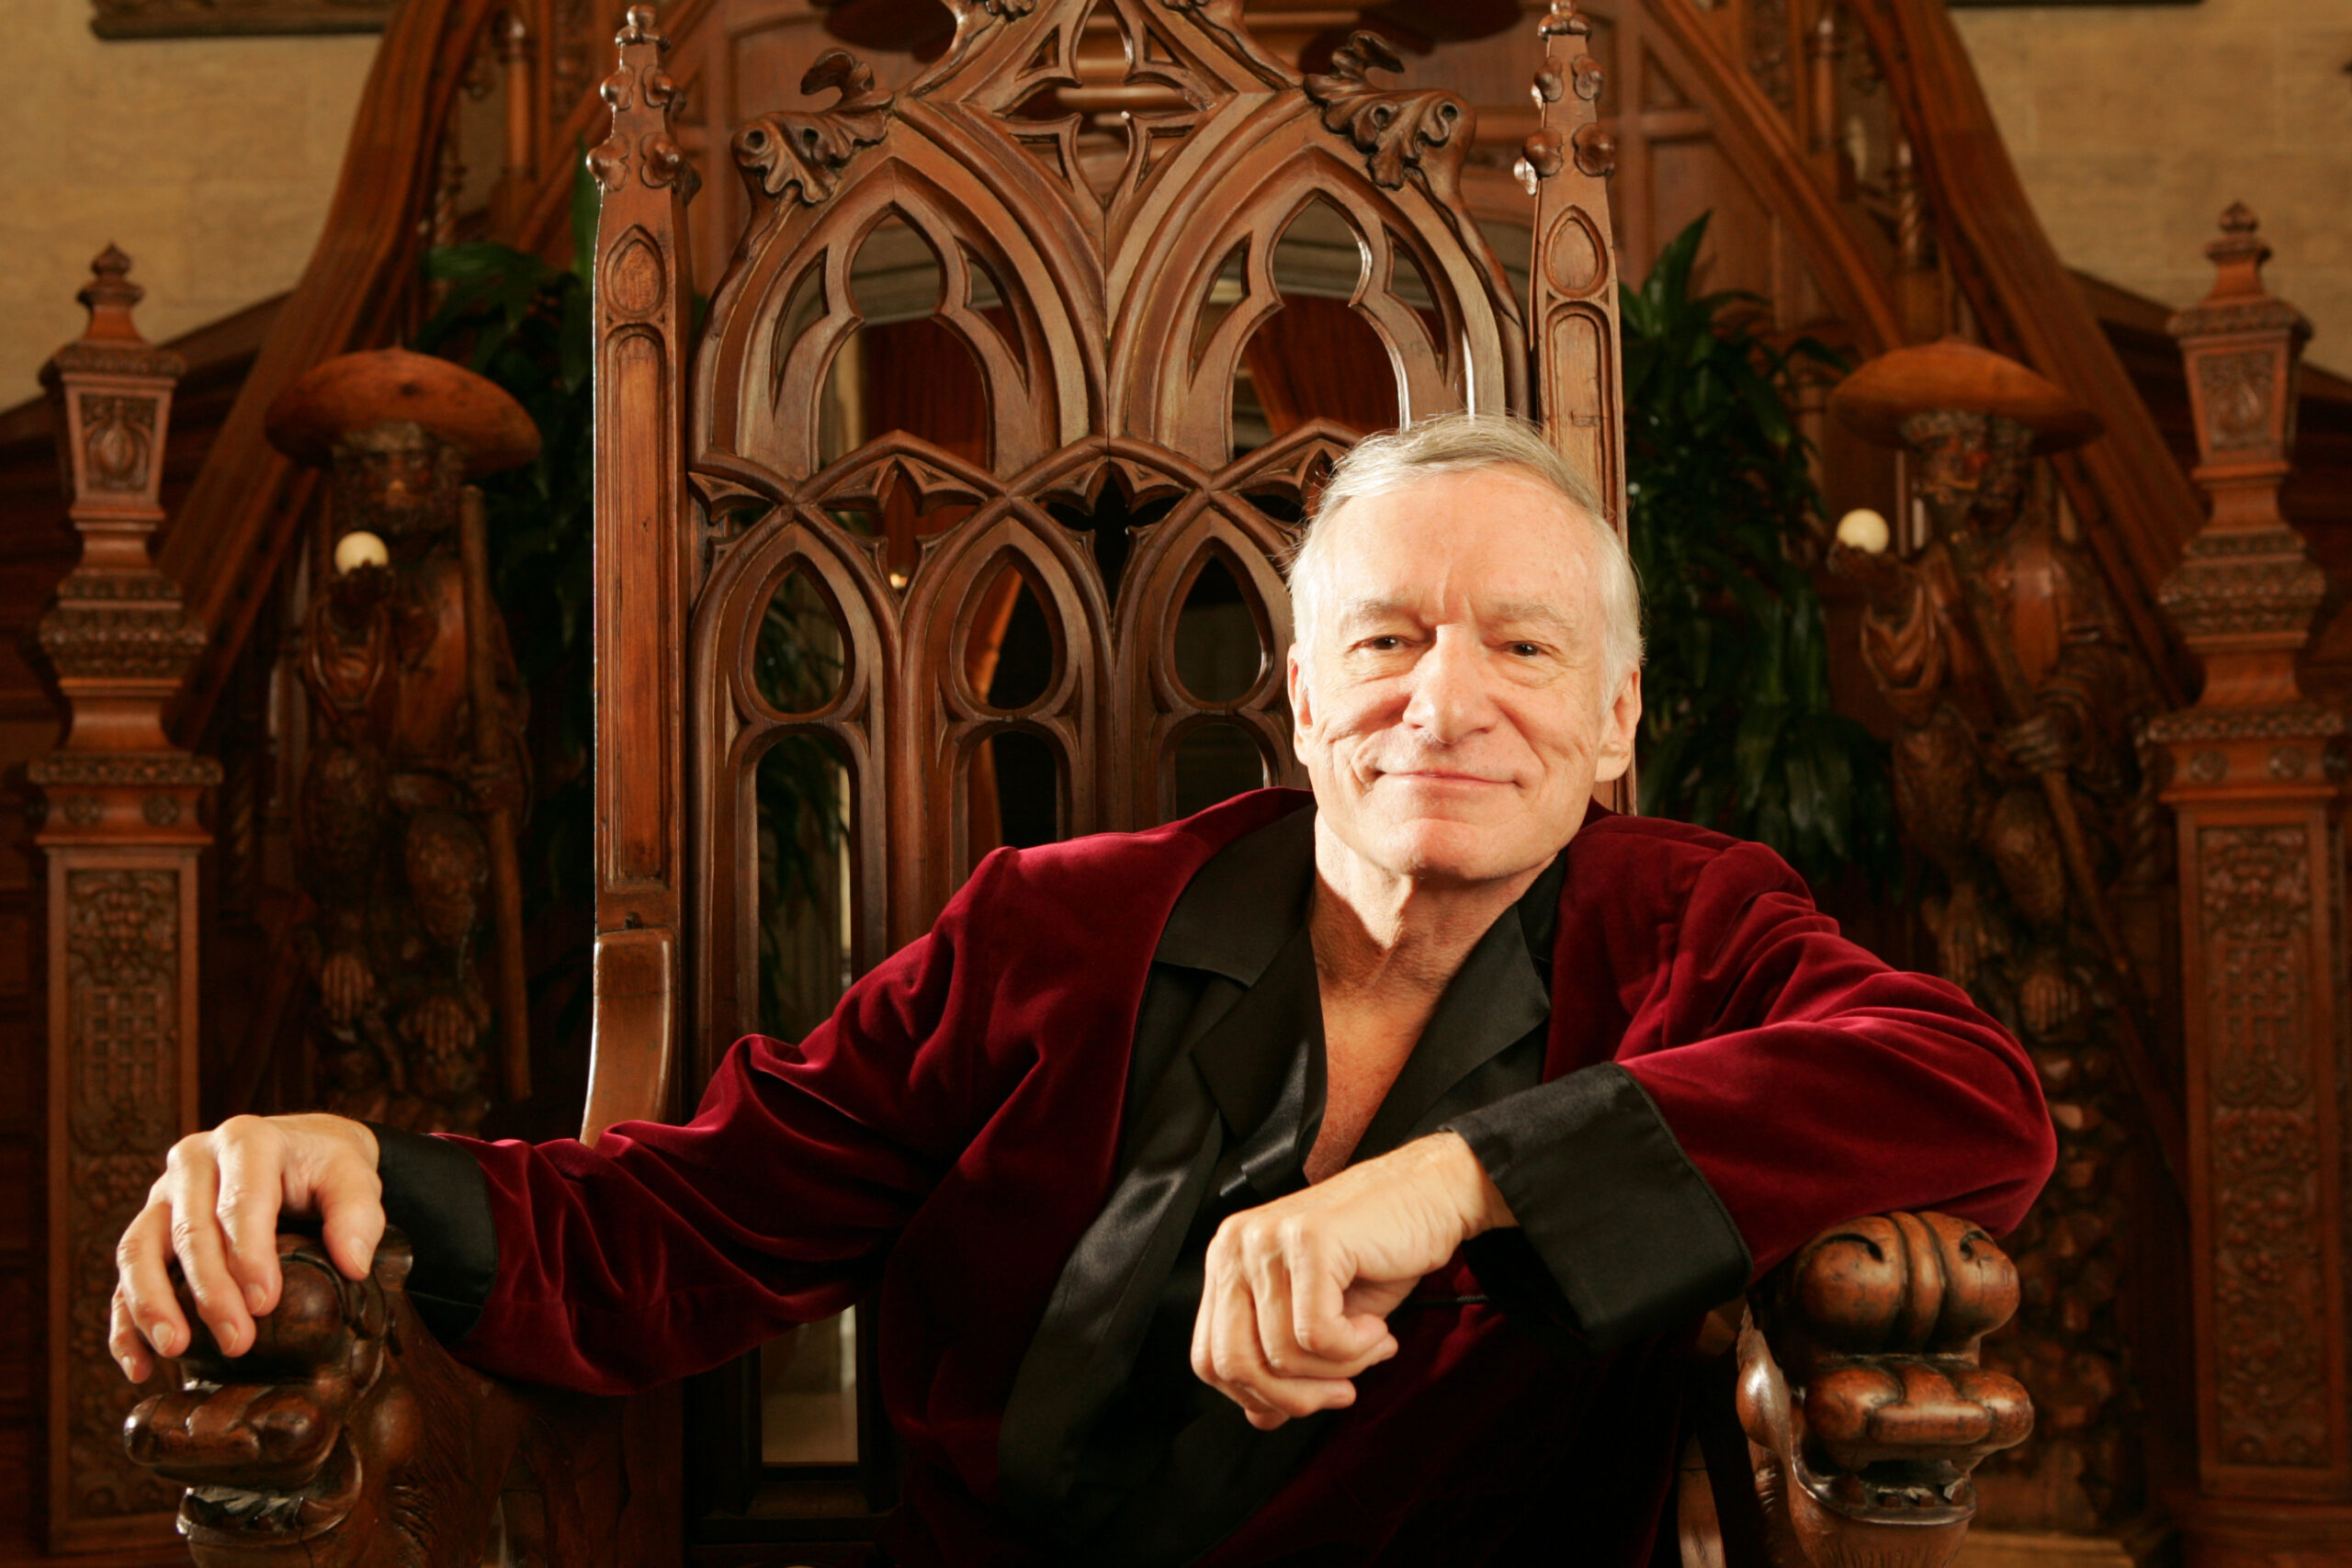 Hugh Hefner’s will has a major clause that could leave his kids penniless